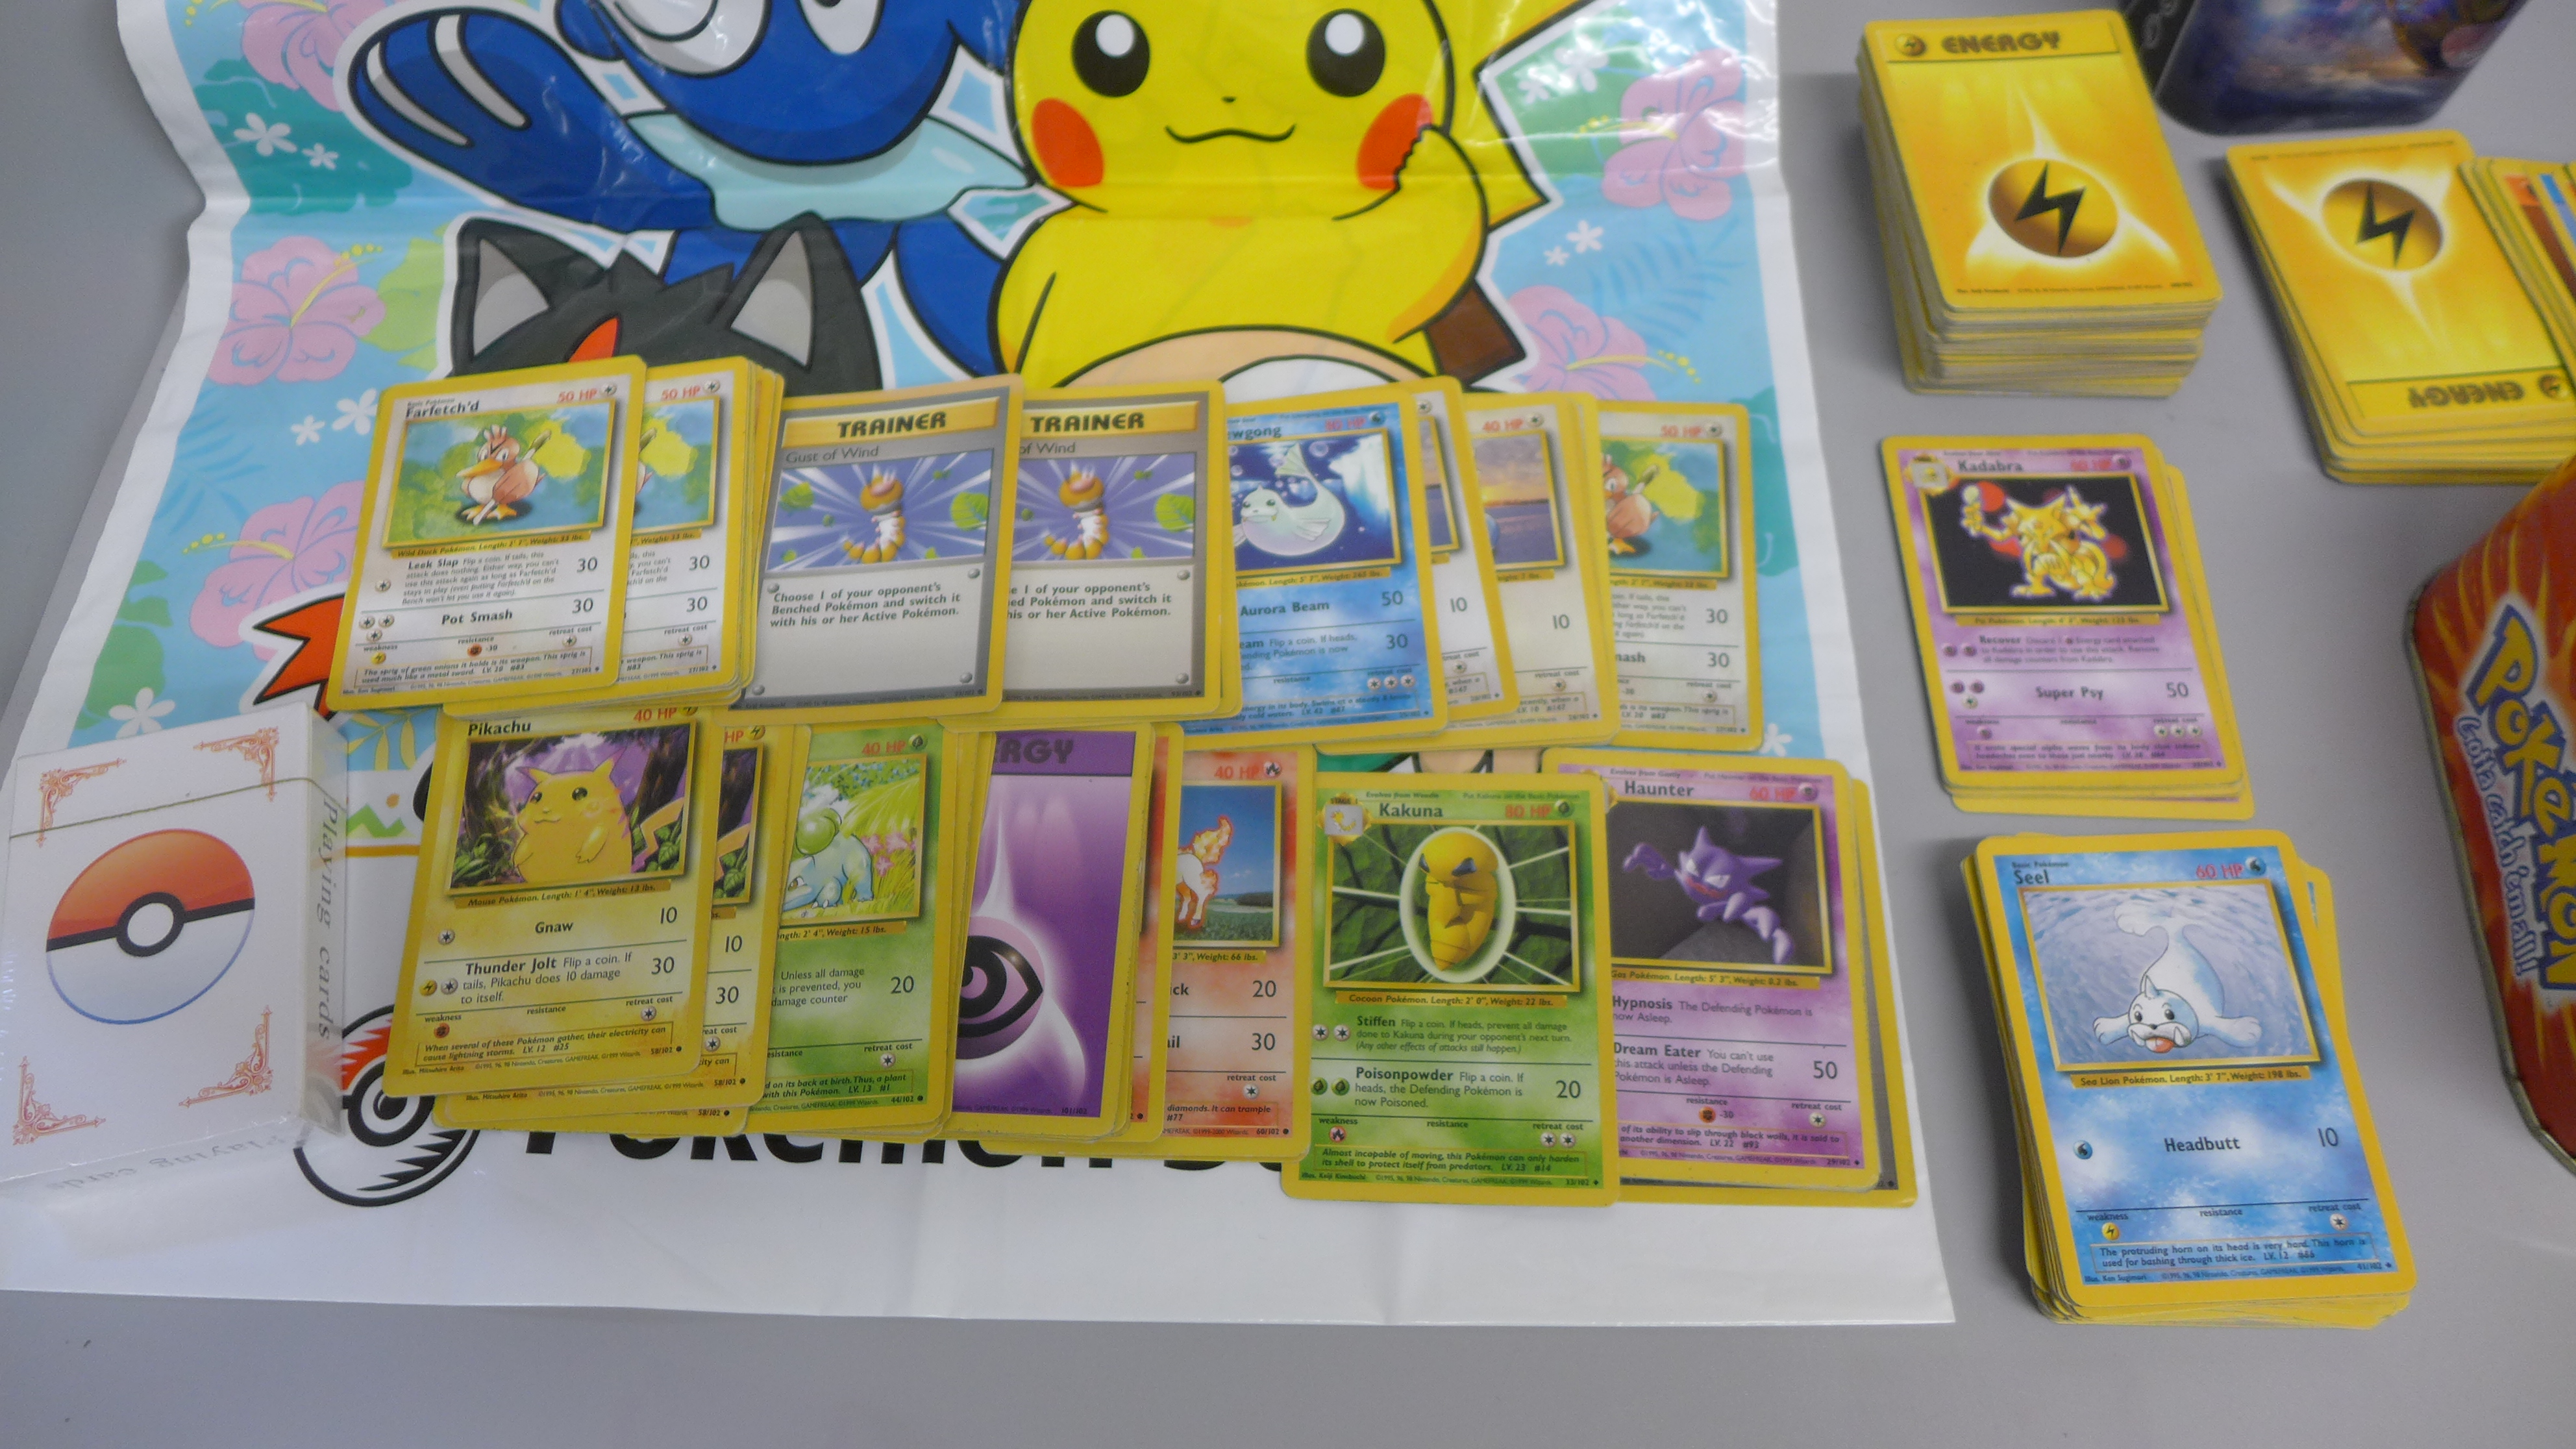 700 Pokemon base set cards including collector tins and book, etc. - Image 2 of 3